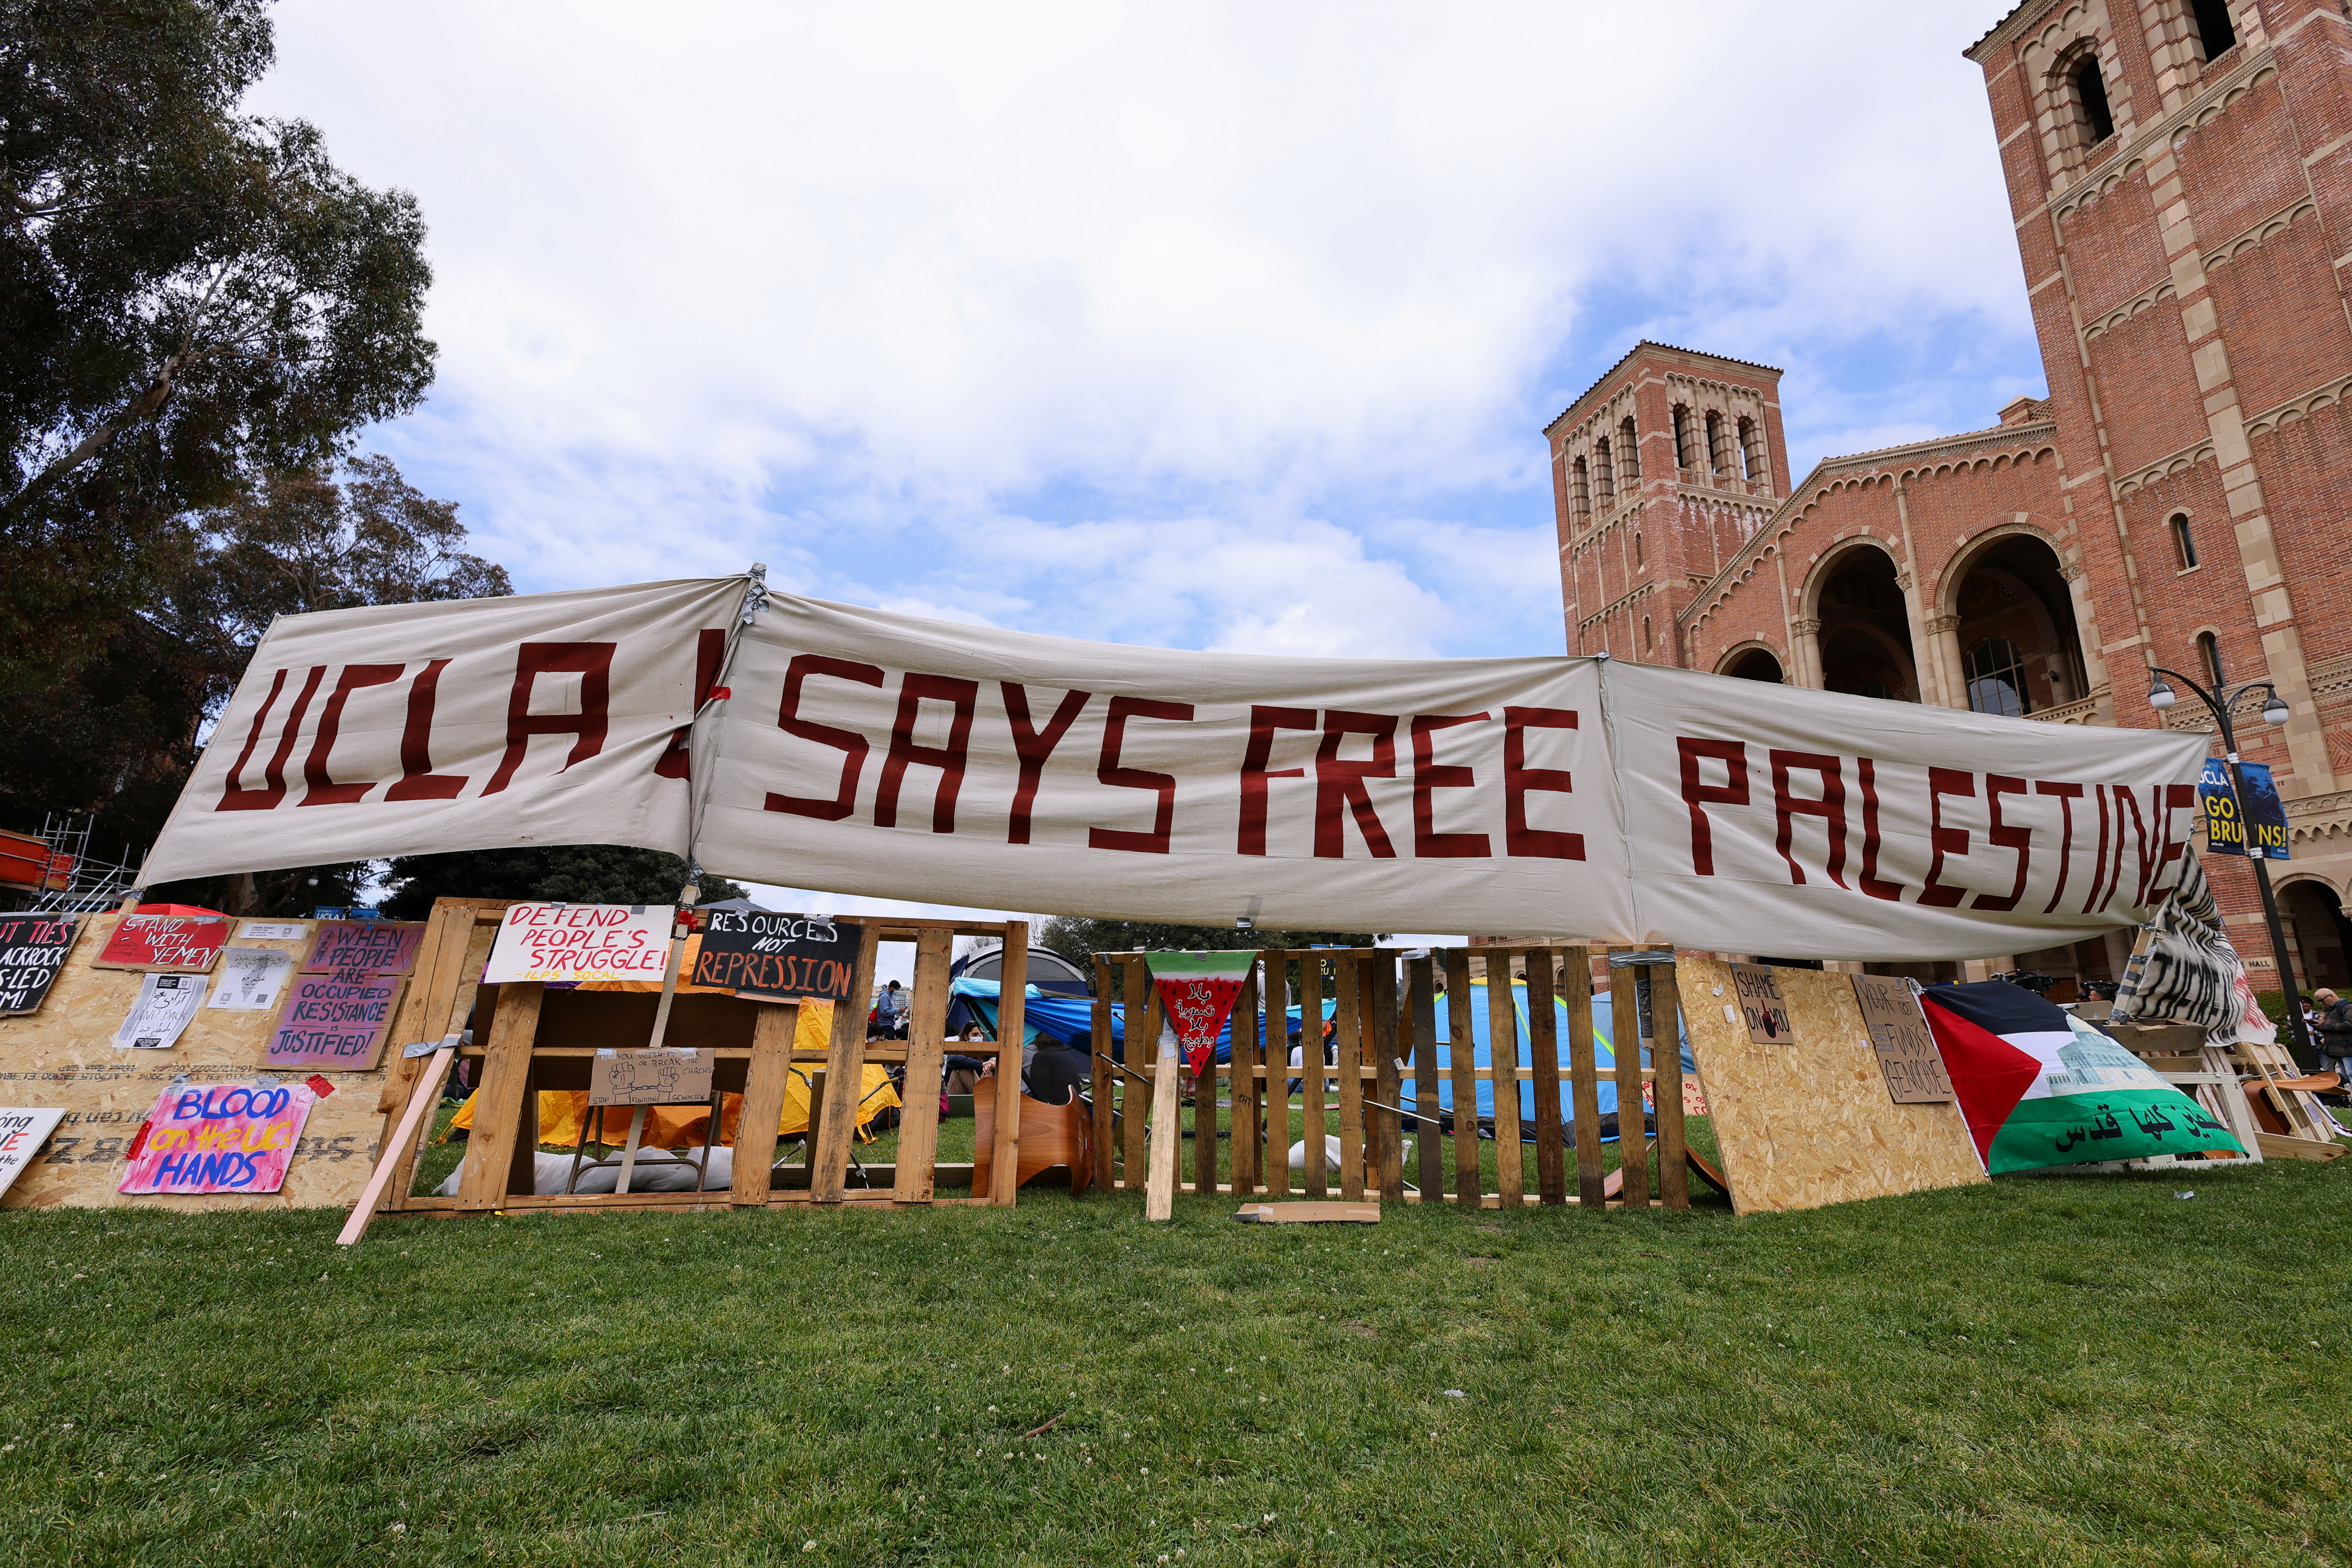 Students protest in support of Palestinians, at UCLA in Los Angeles